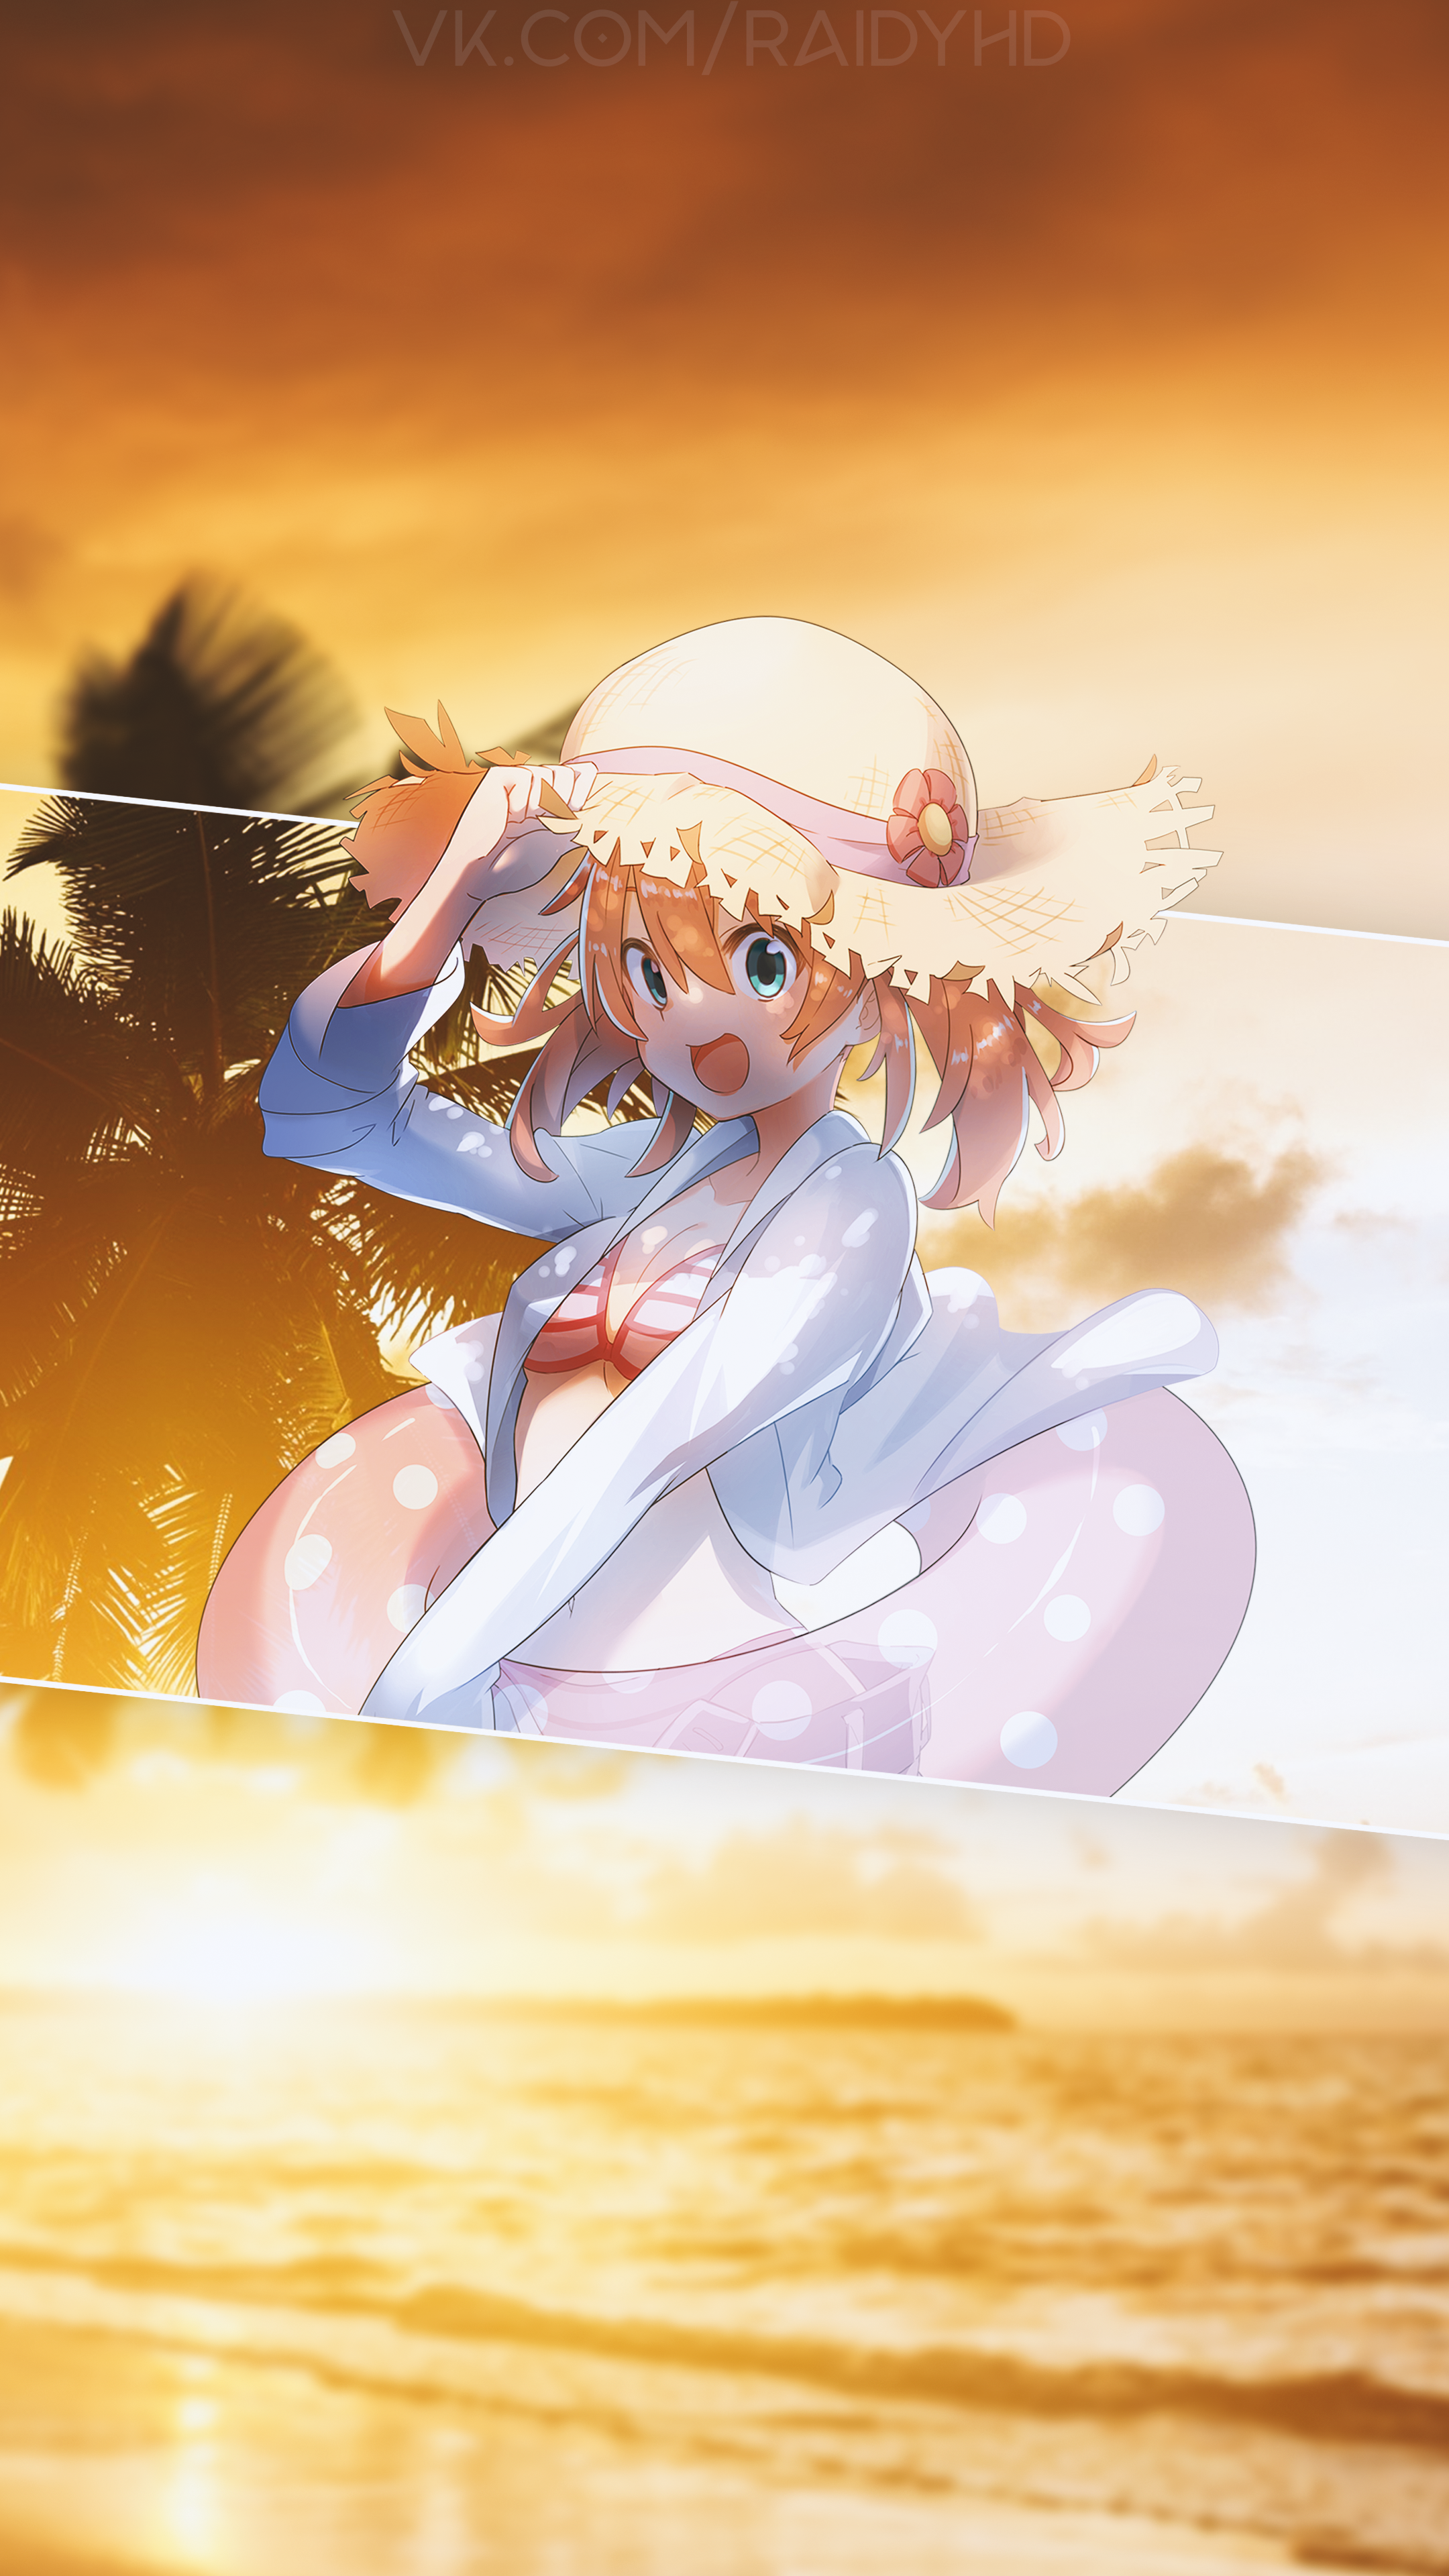 Anime 2160x3840 anime anime girls picture-in-picture beach palm trees floater straw hat open jacket sunset sunset glow